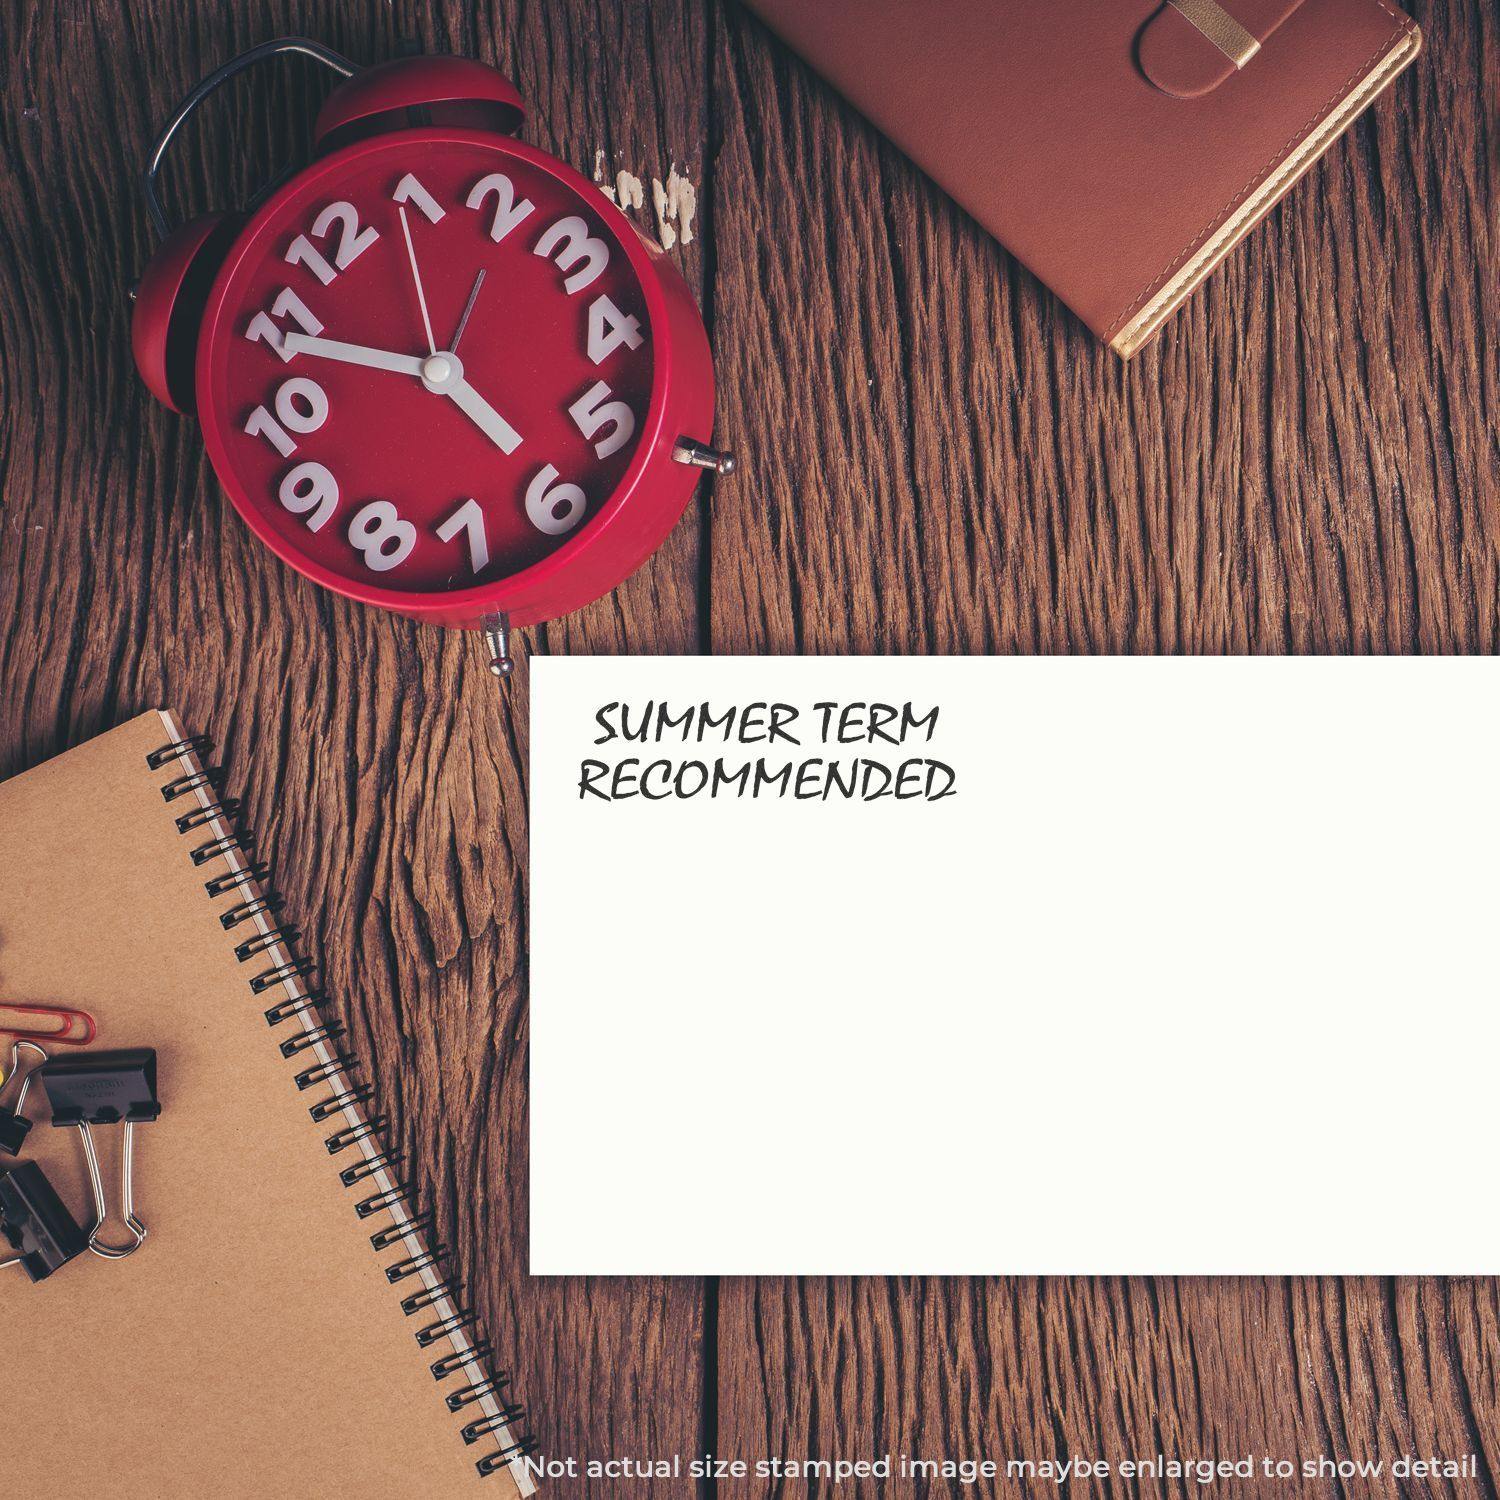 A stock office rubber stamp with a stamped image showing how the text "SUMMER TERM RECOMMENDED" is displayed after stamping.